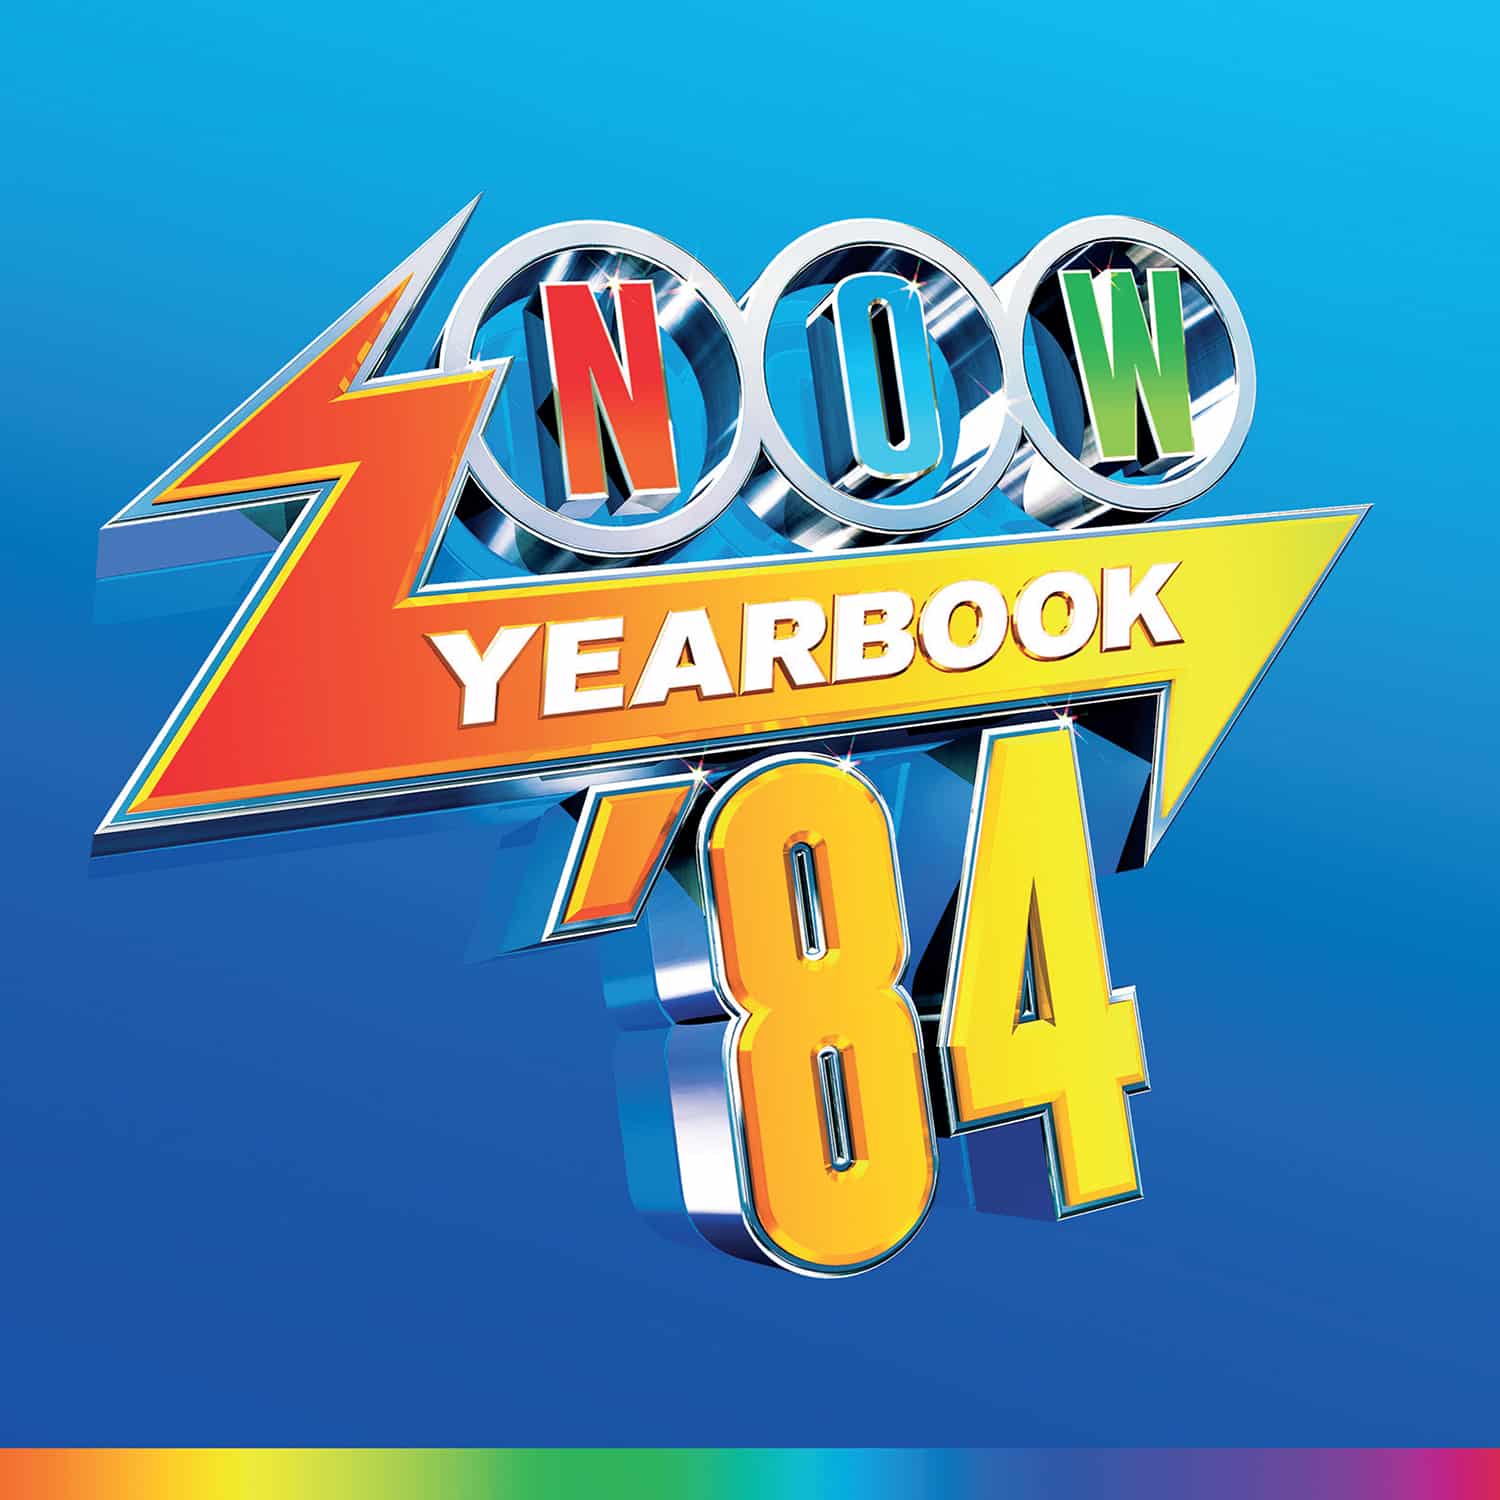 NOW - Yearbook 1984 - Various Artists